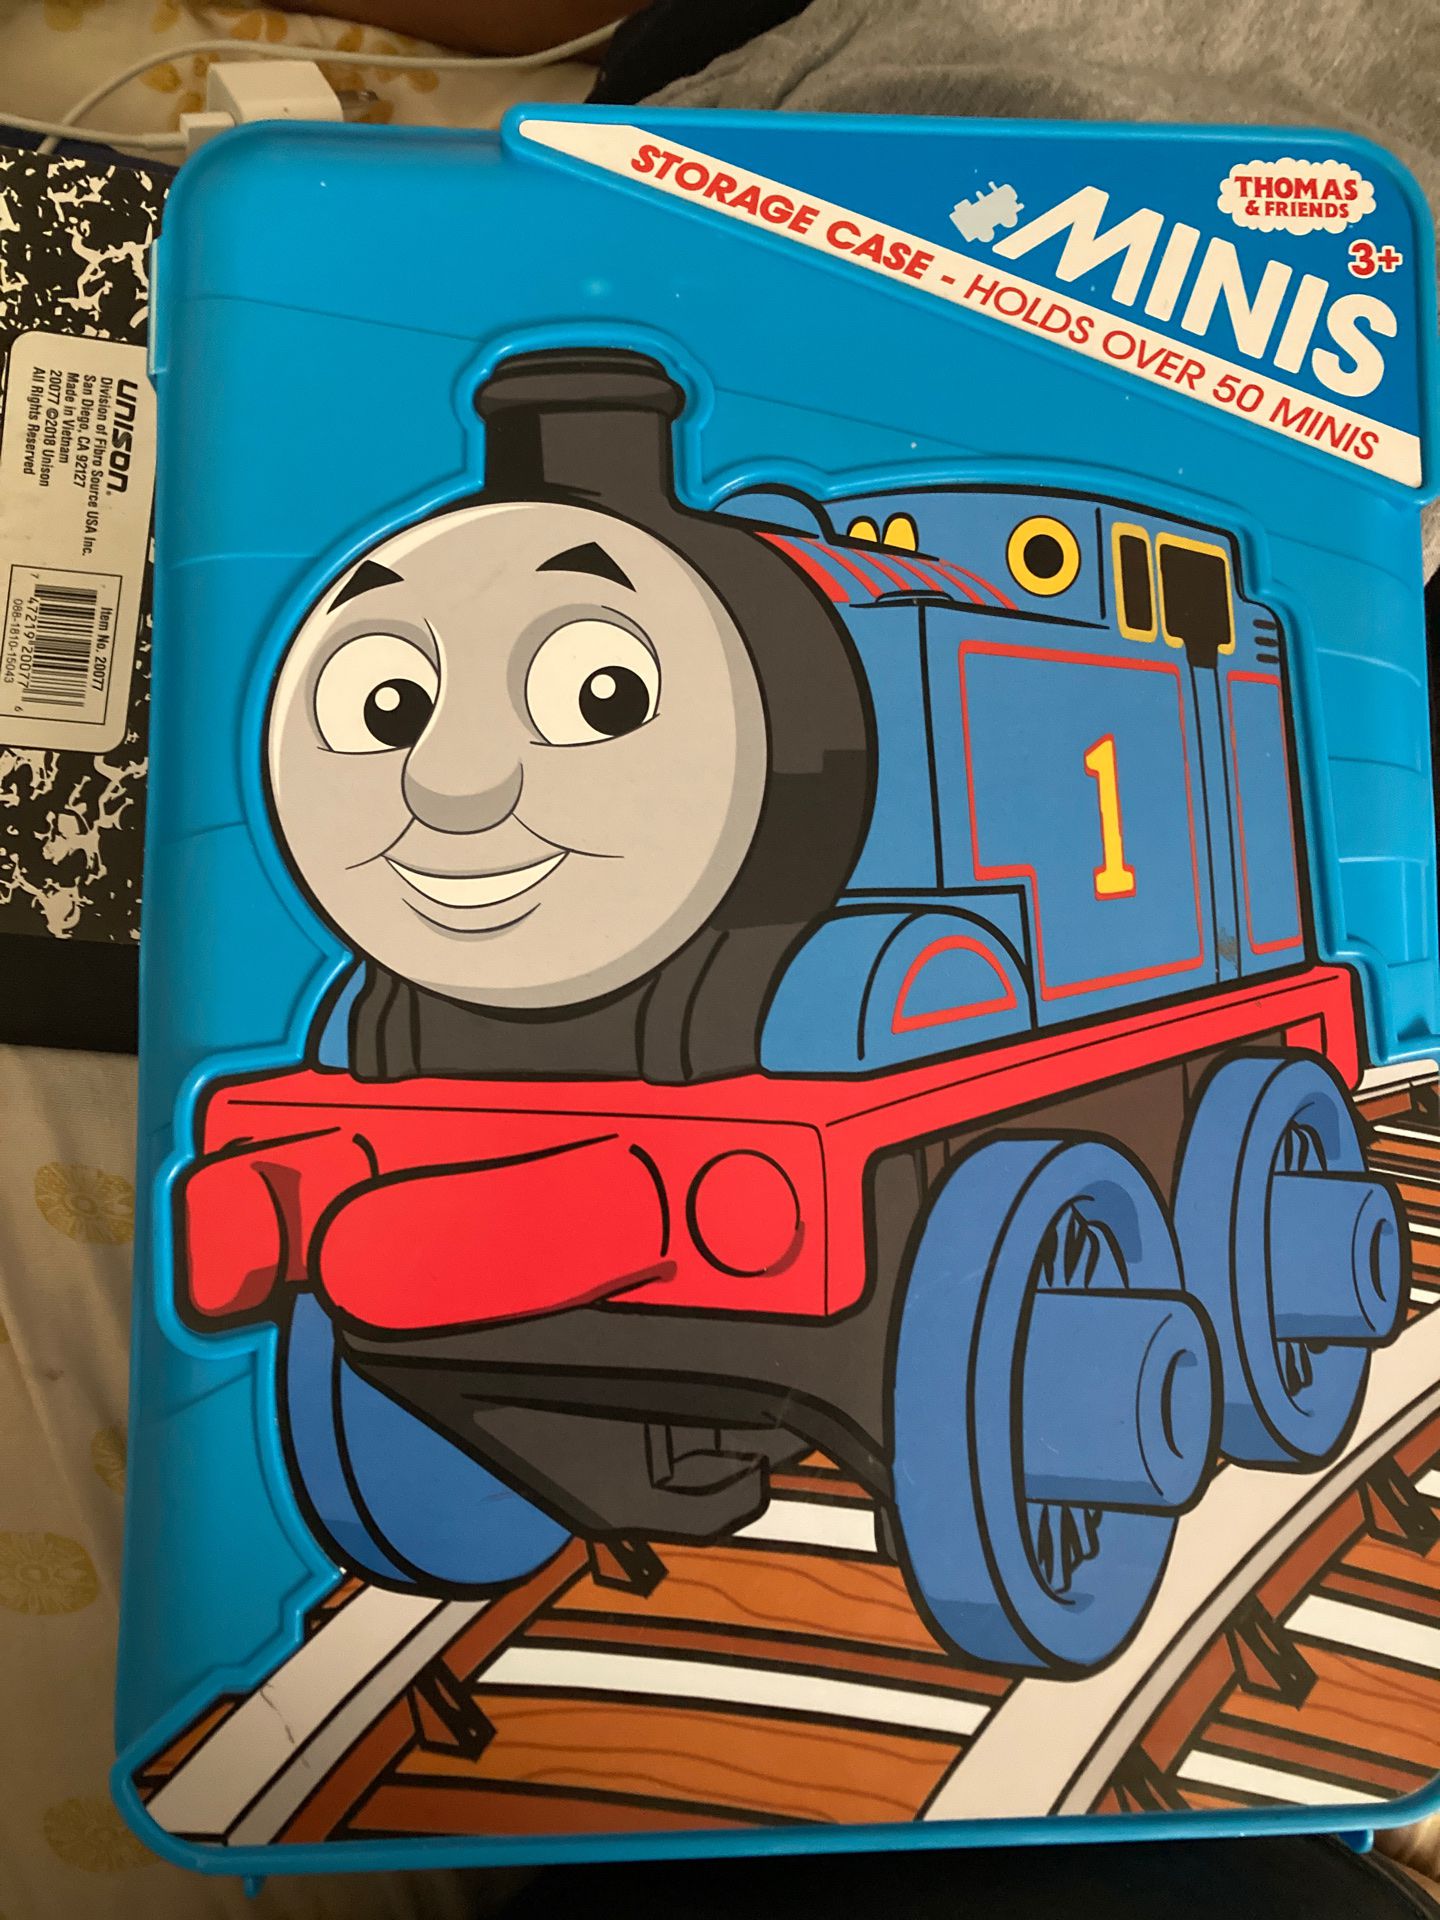 Thomas And Friends Minis Storage Case with 26 mini Thomas and Friends